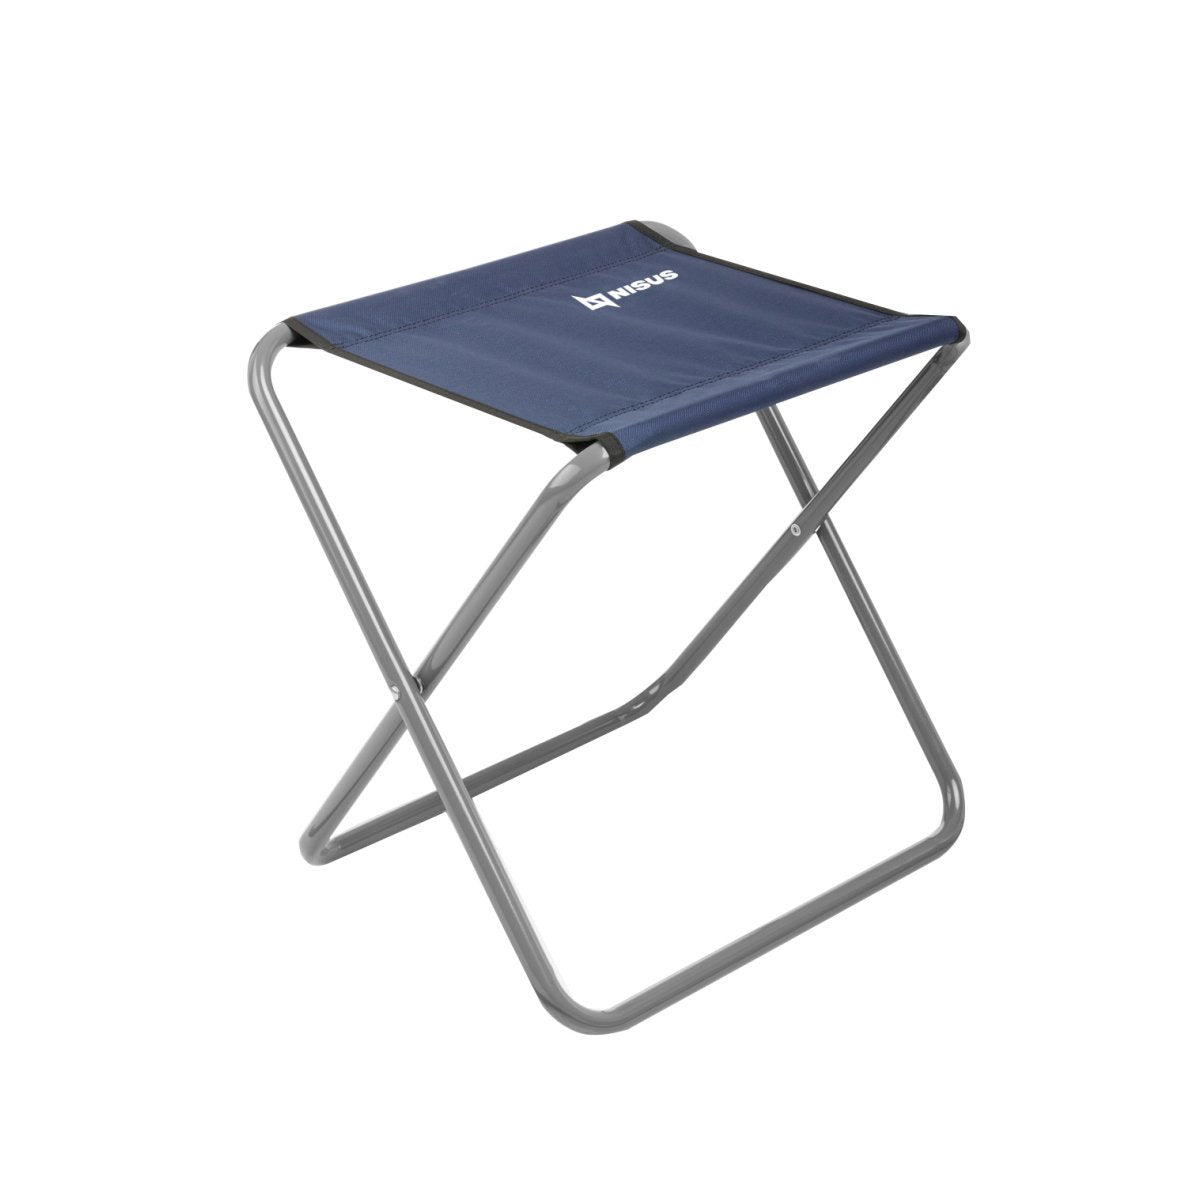 Nisus blue folding camping stool steel pole and Oxford fabric